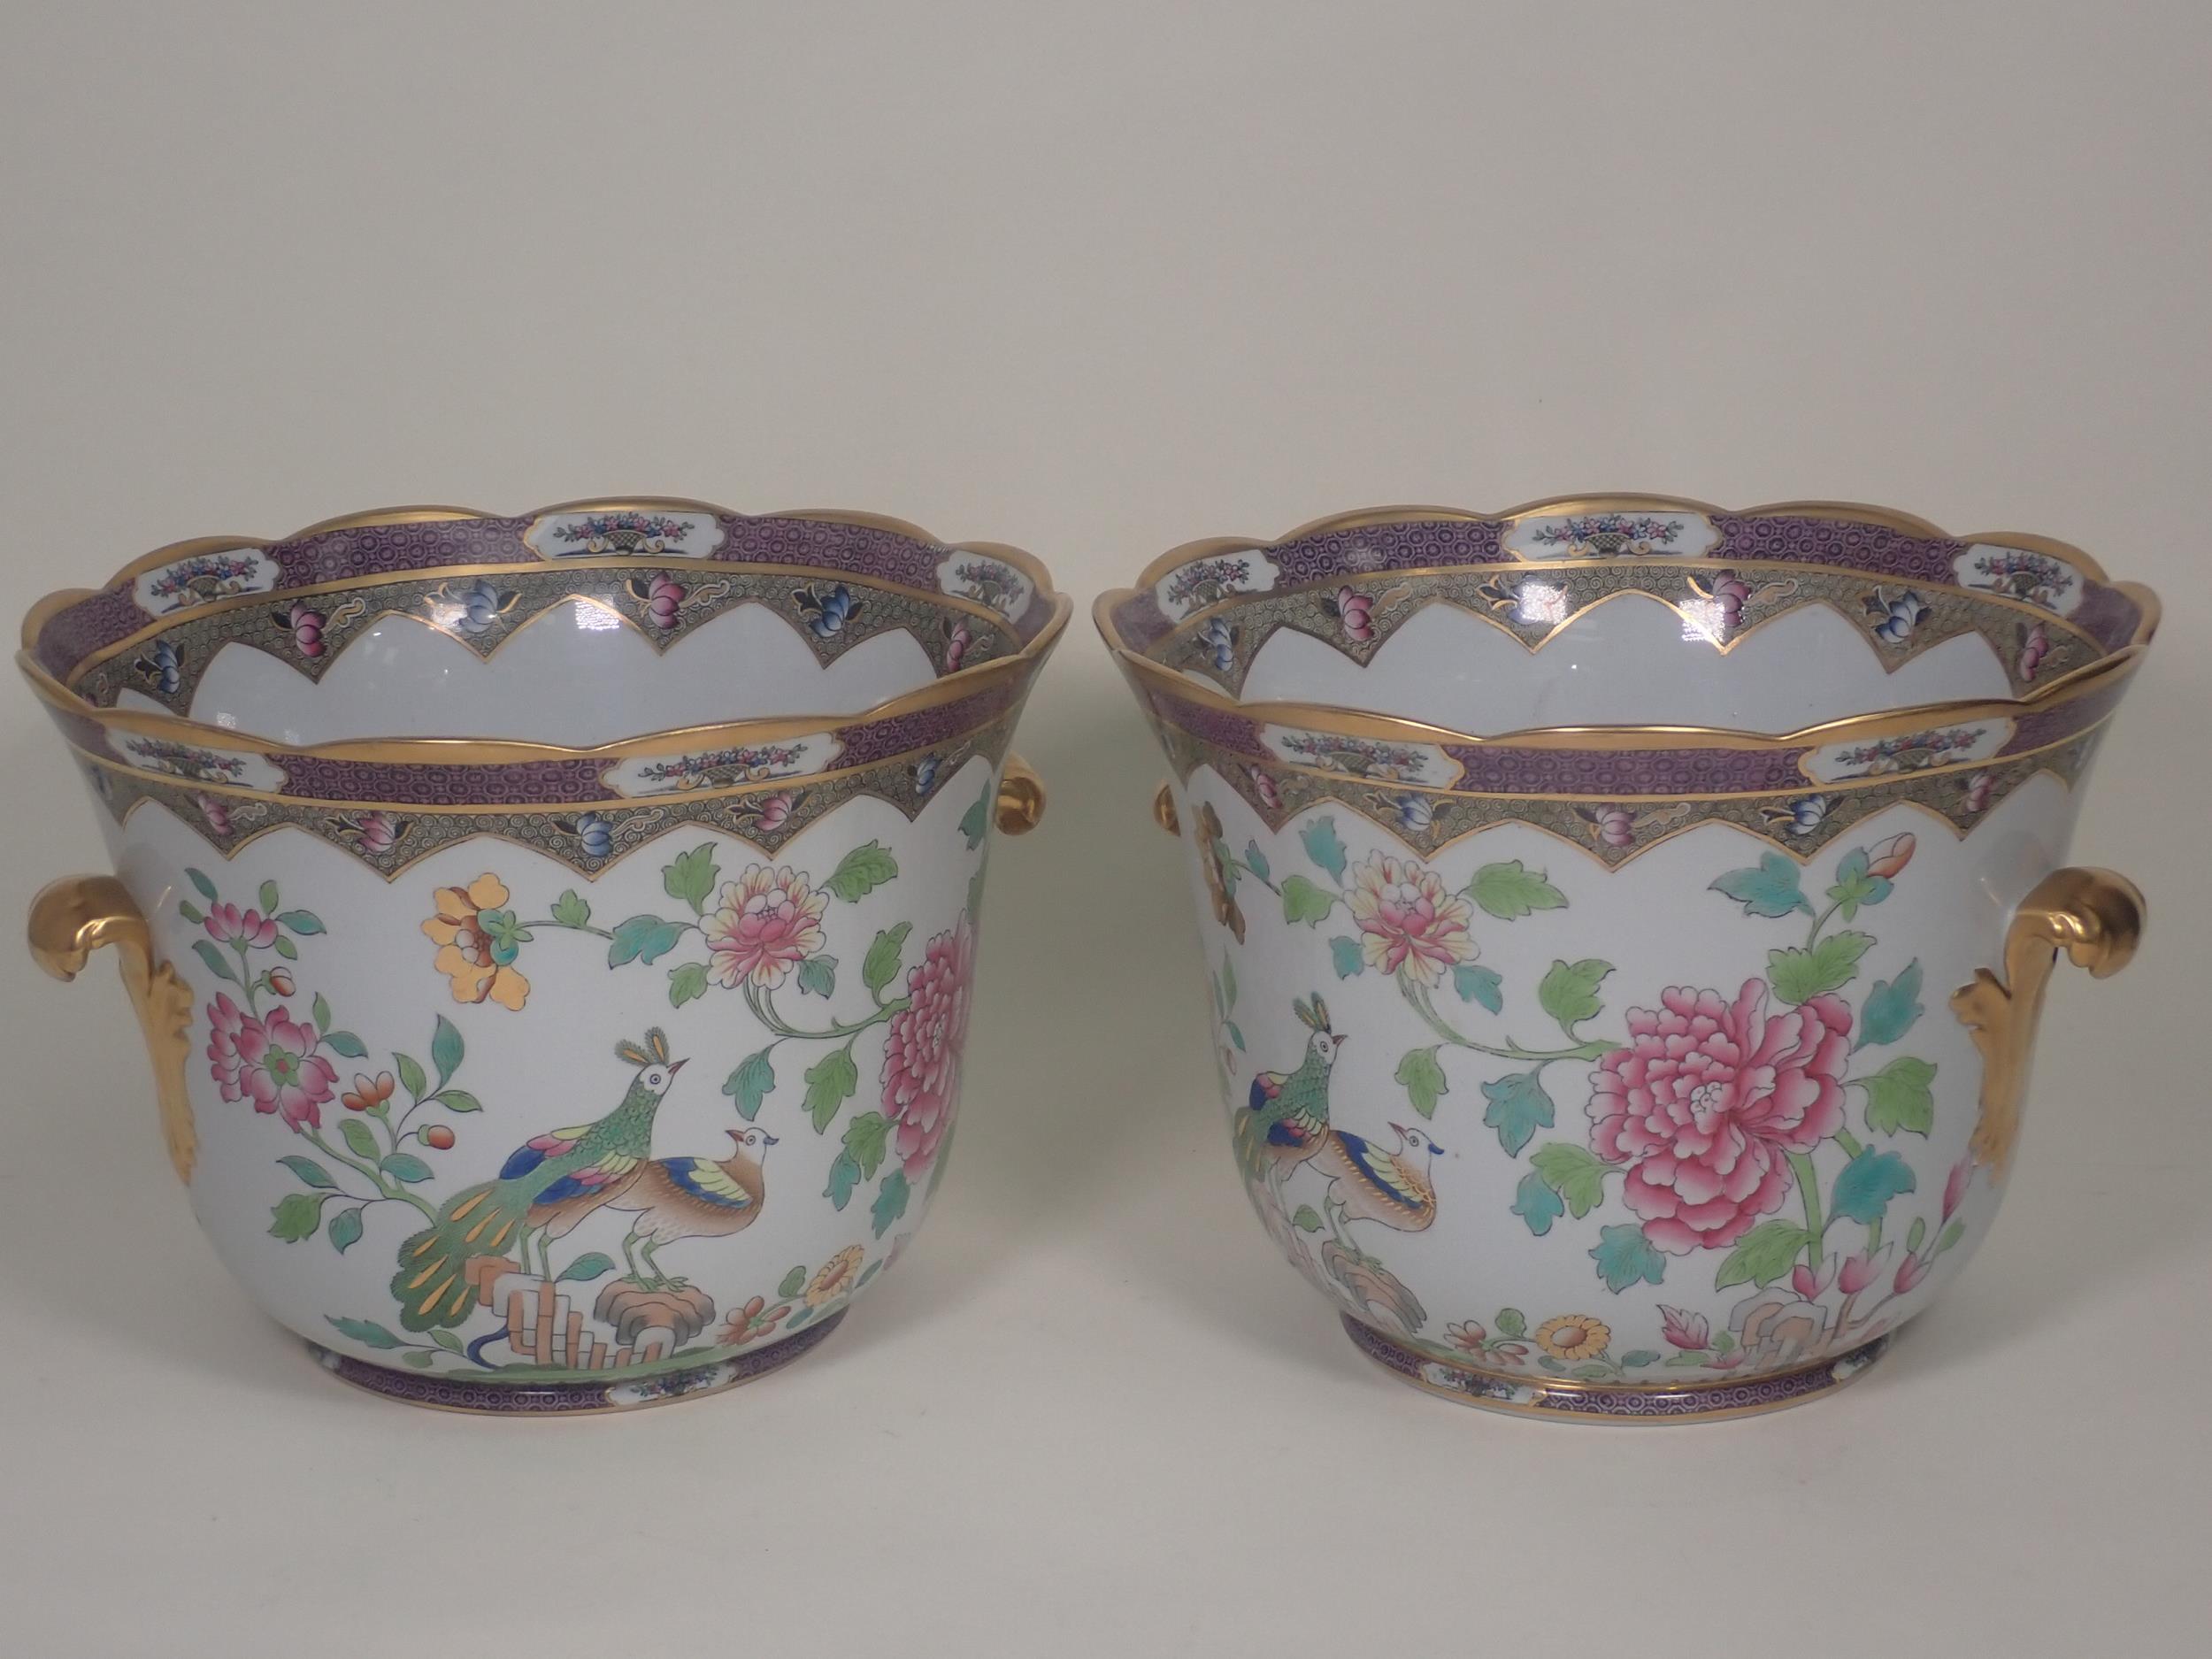 A pair of Spode porcelain Wine Coolers decorated exotic birds amongst flowers with gilded leafage